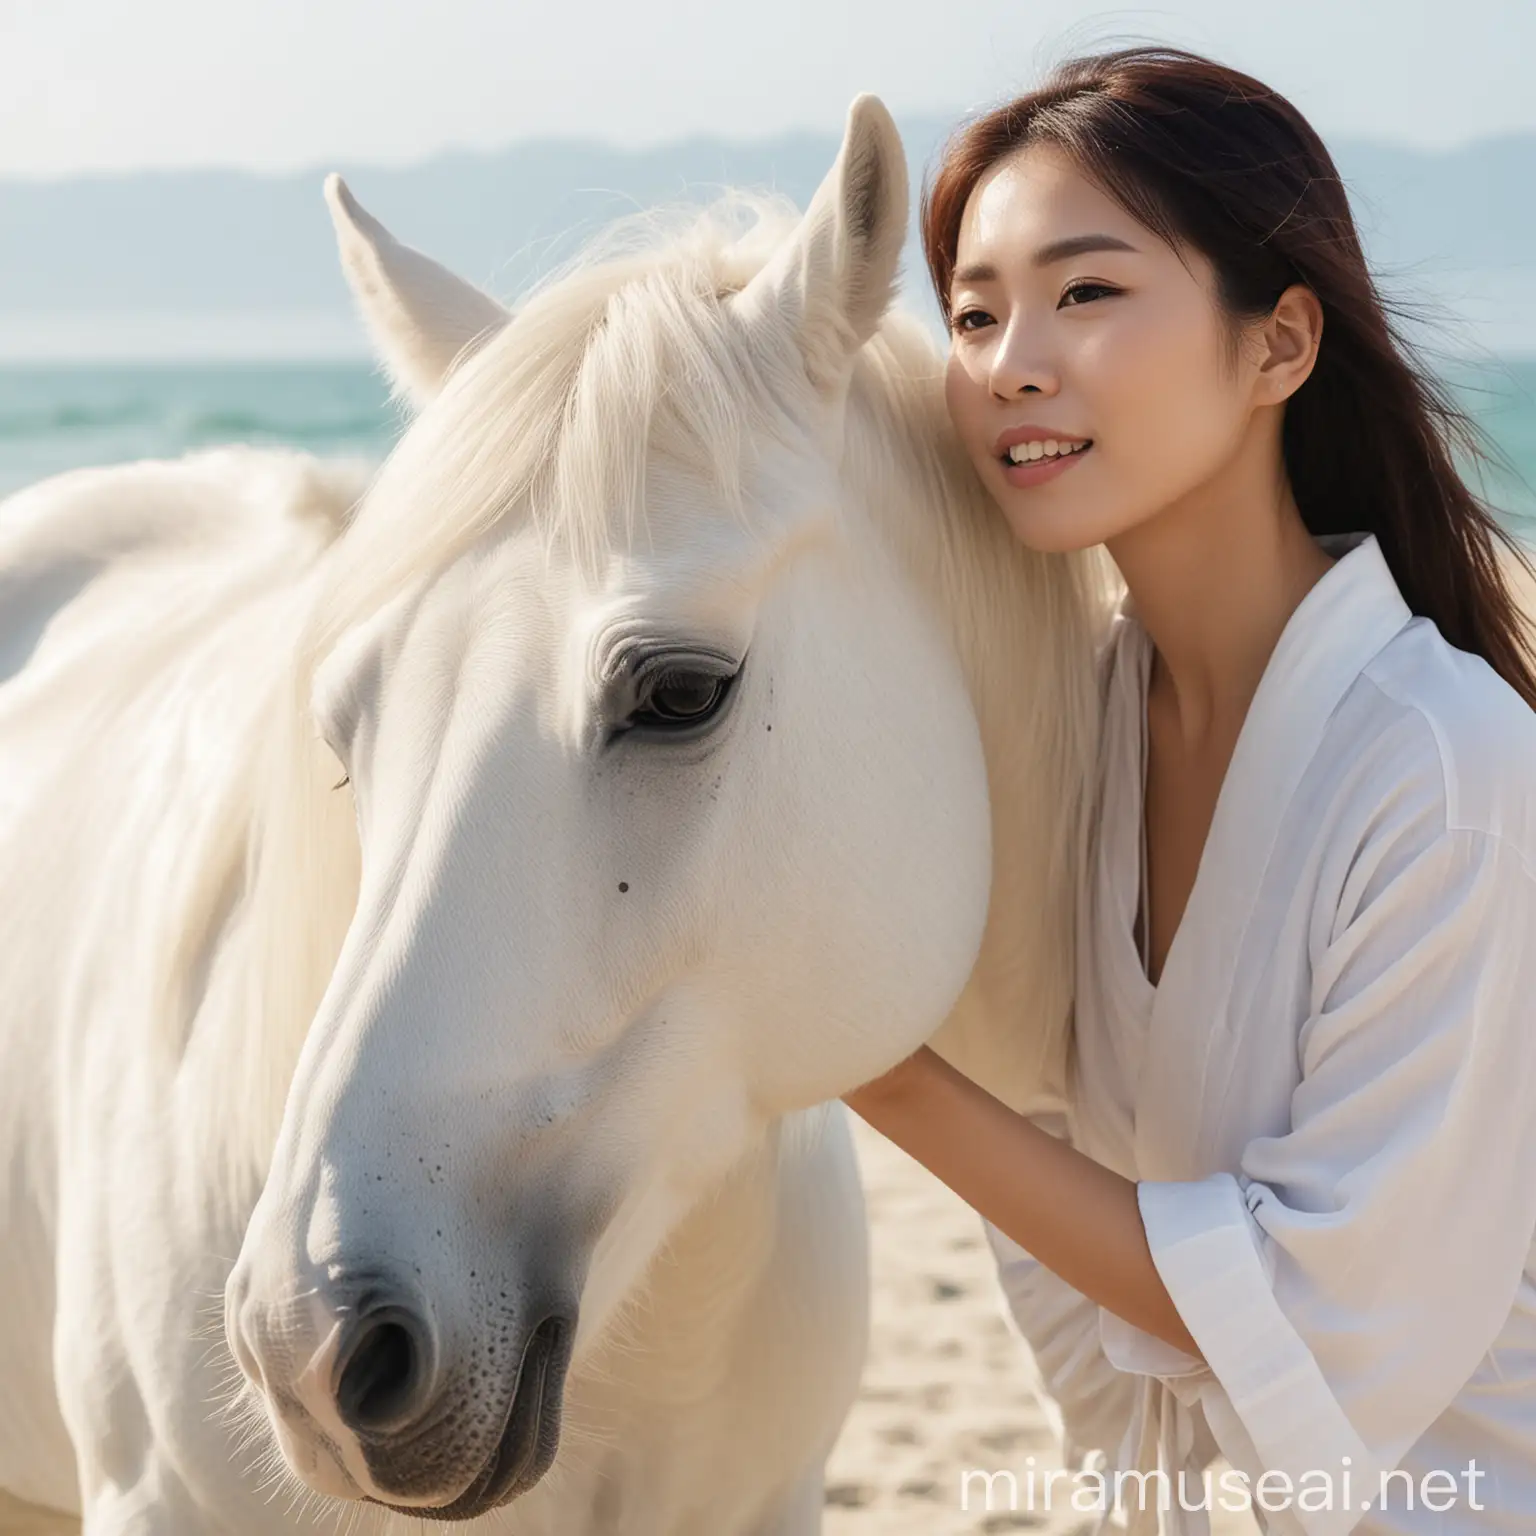 Japanese Woman Posing with White Horse on Beach